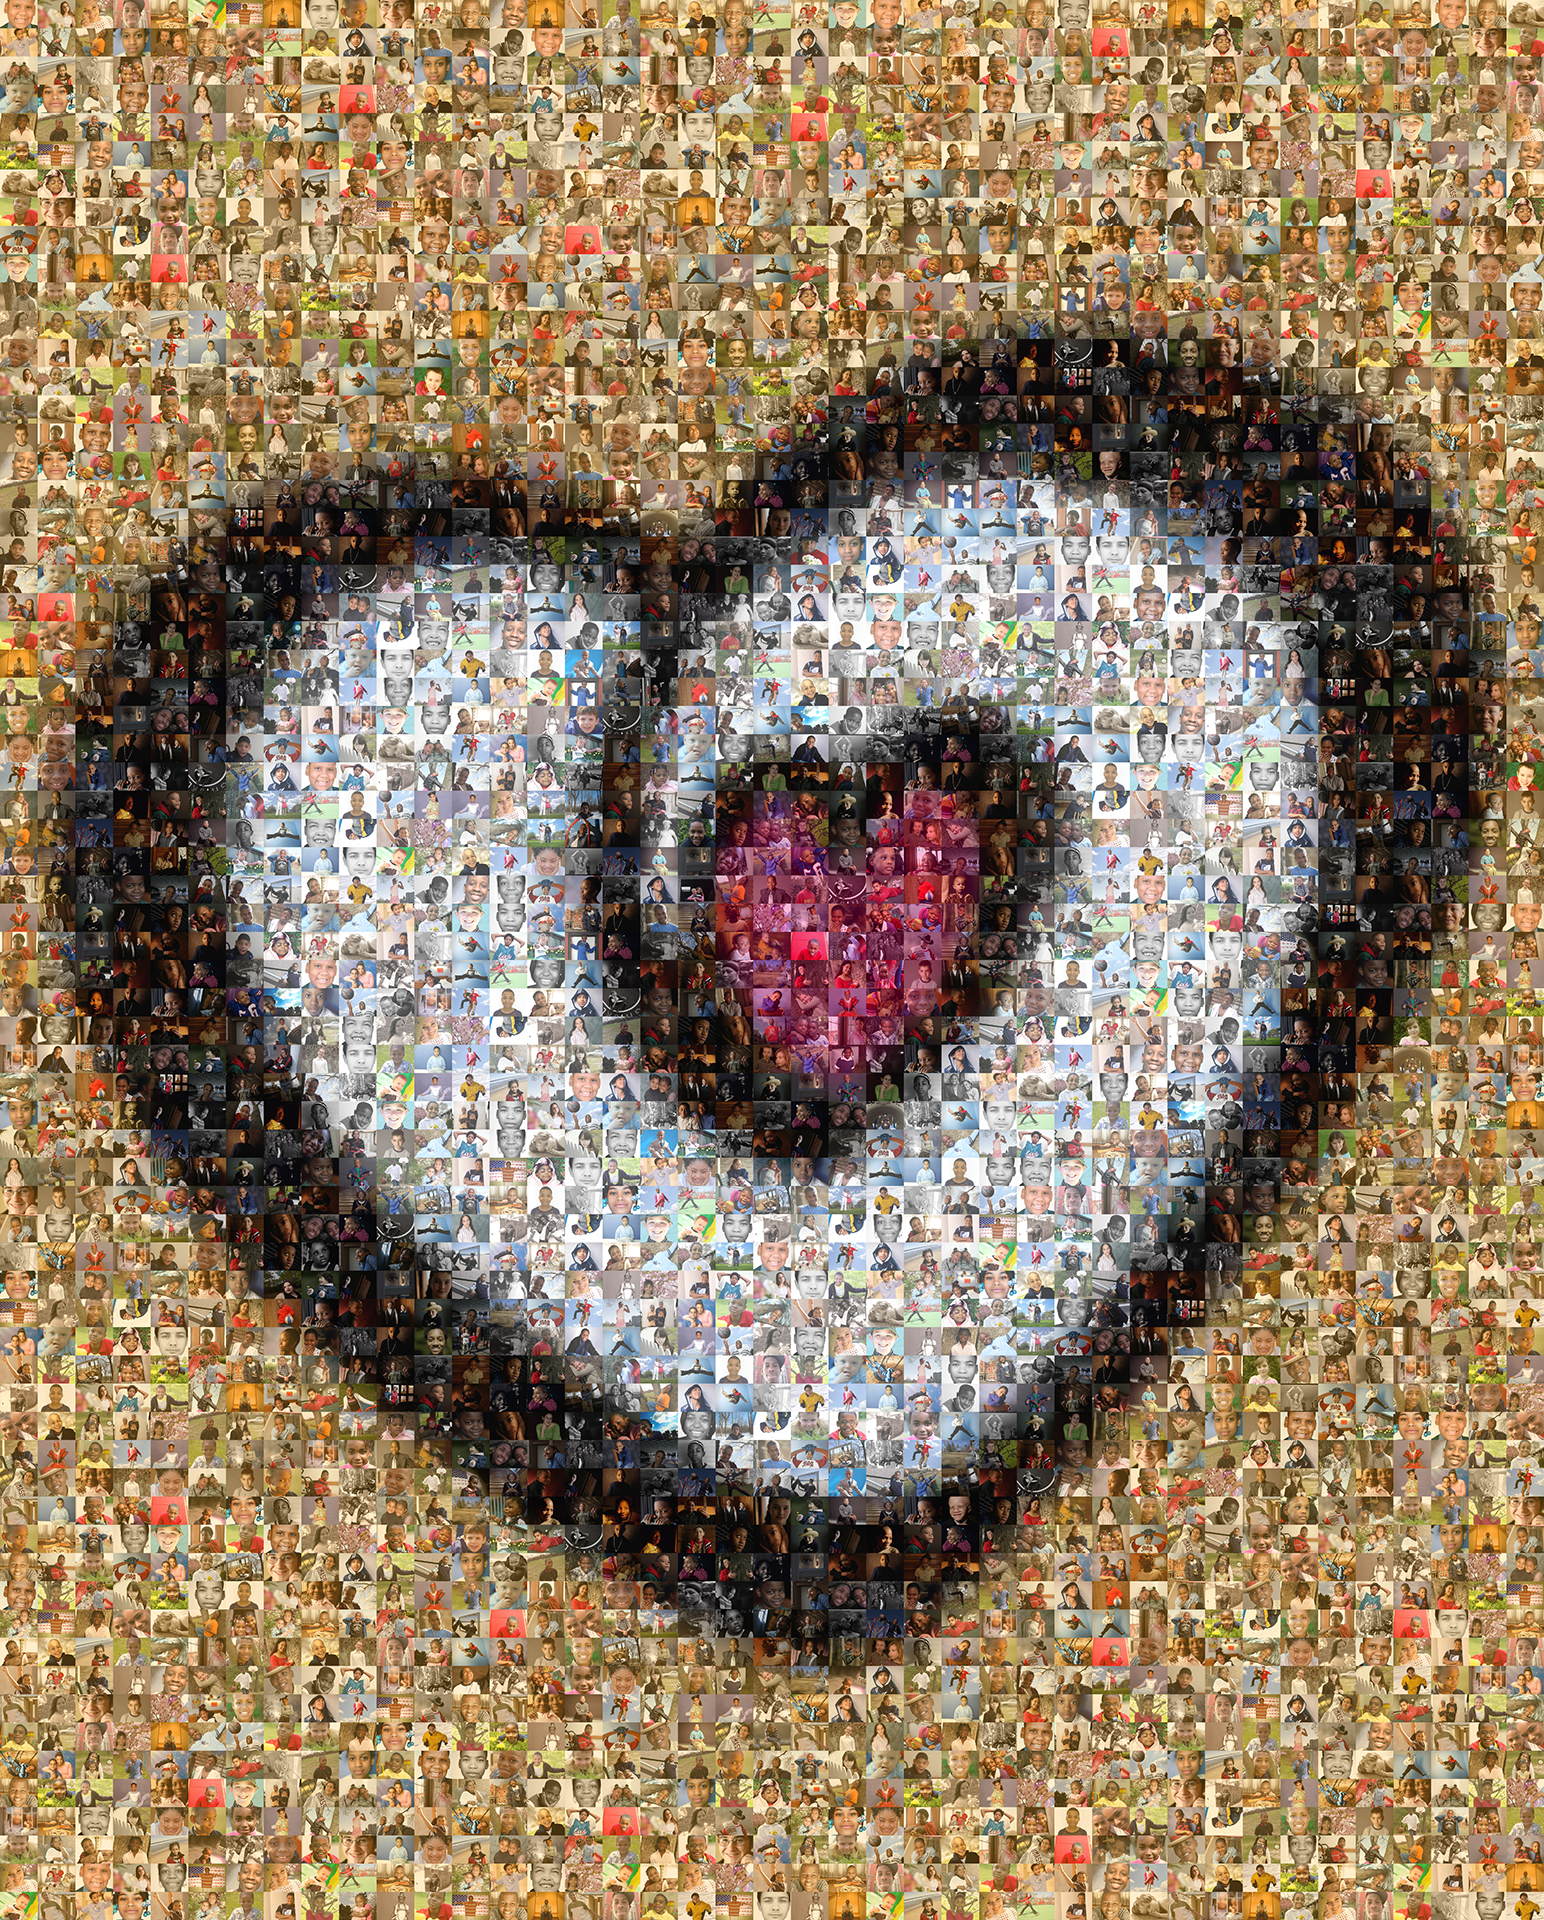 photo mosaic created using 348 professional photos of children that need homes